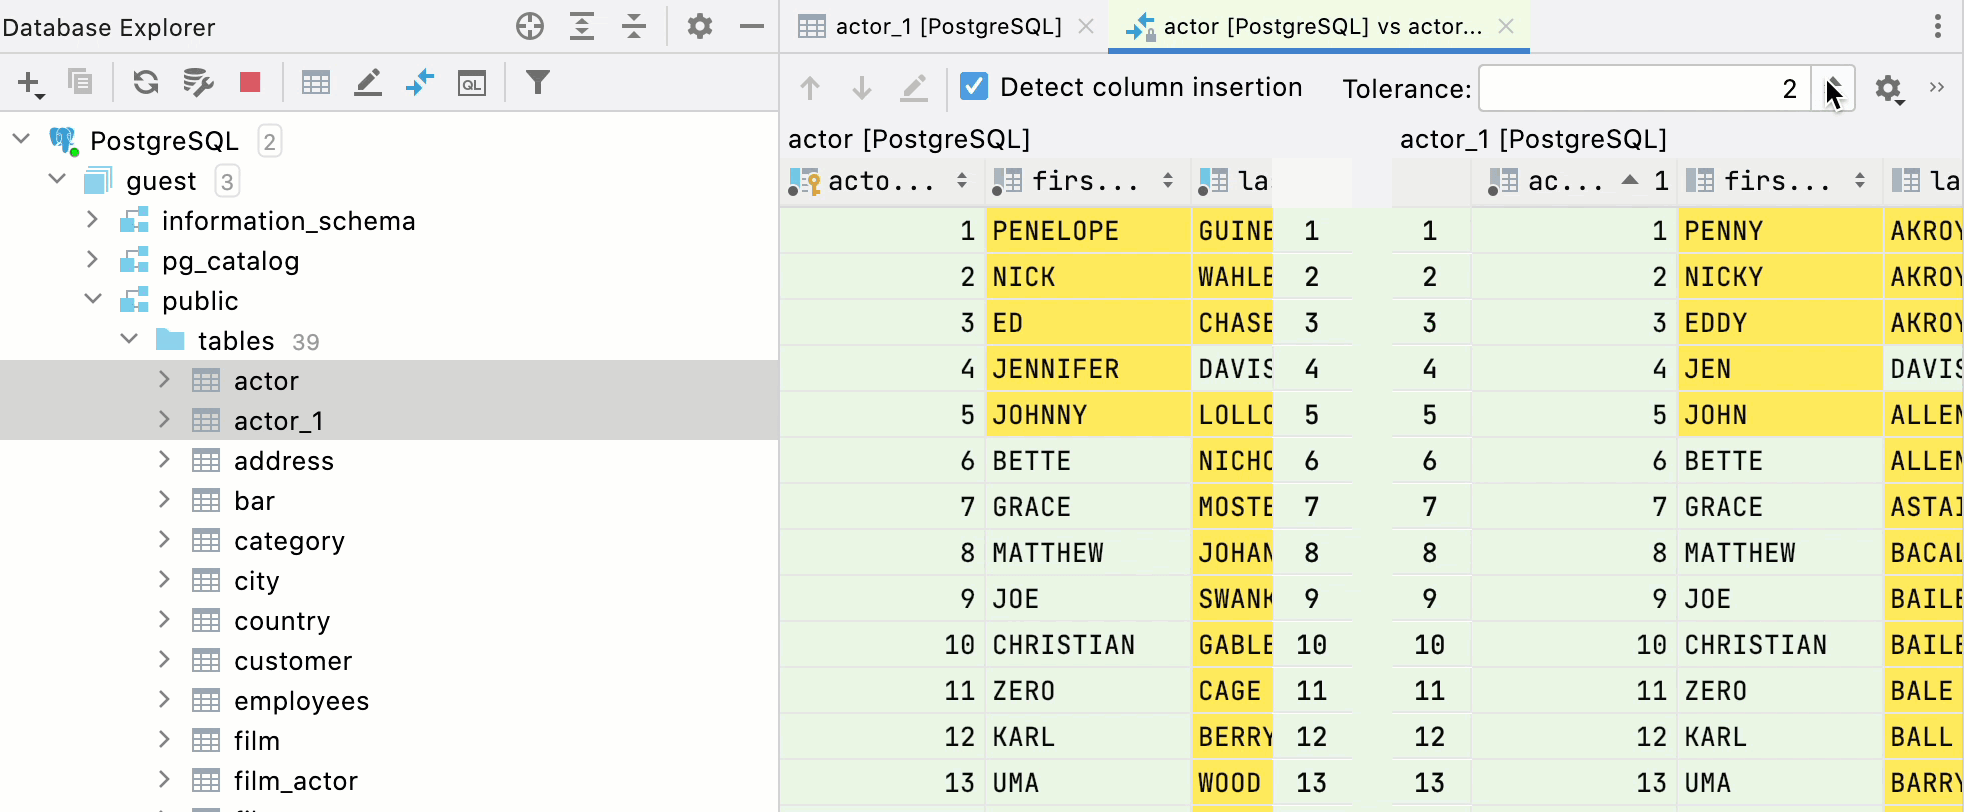 Compare two tables from the Database Explorer tool window